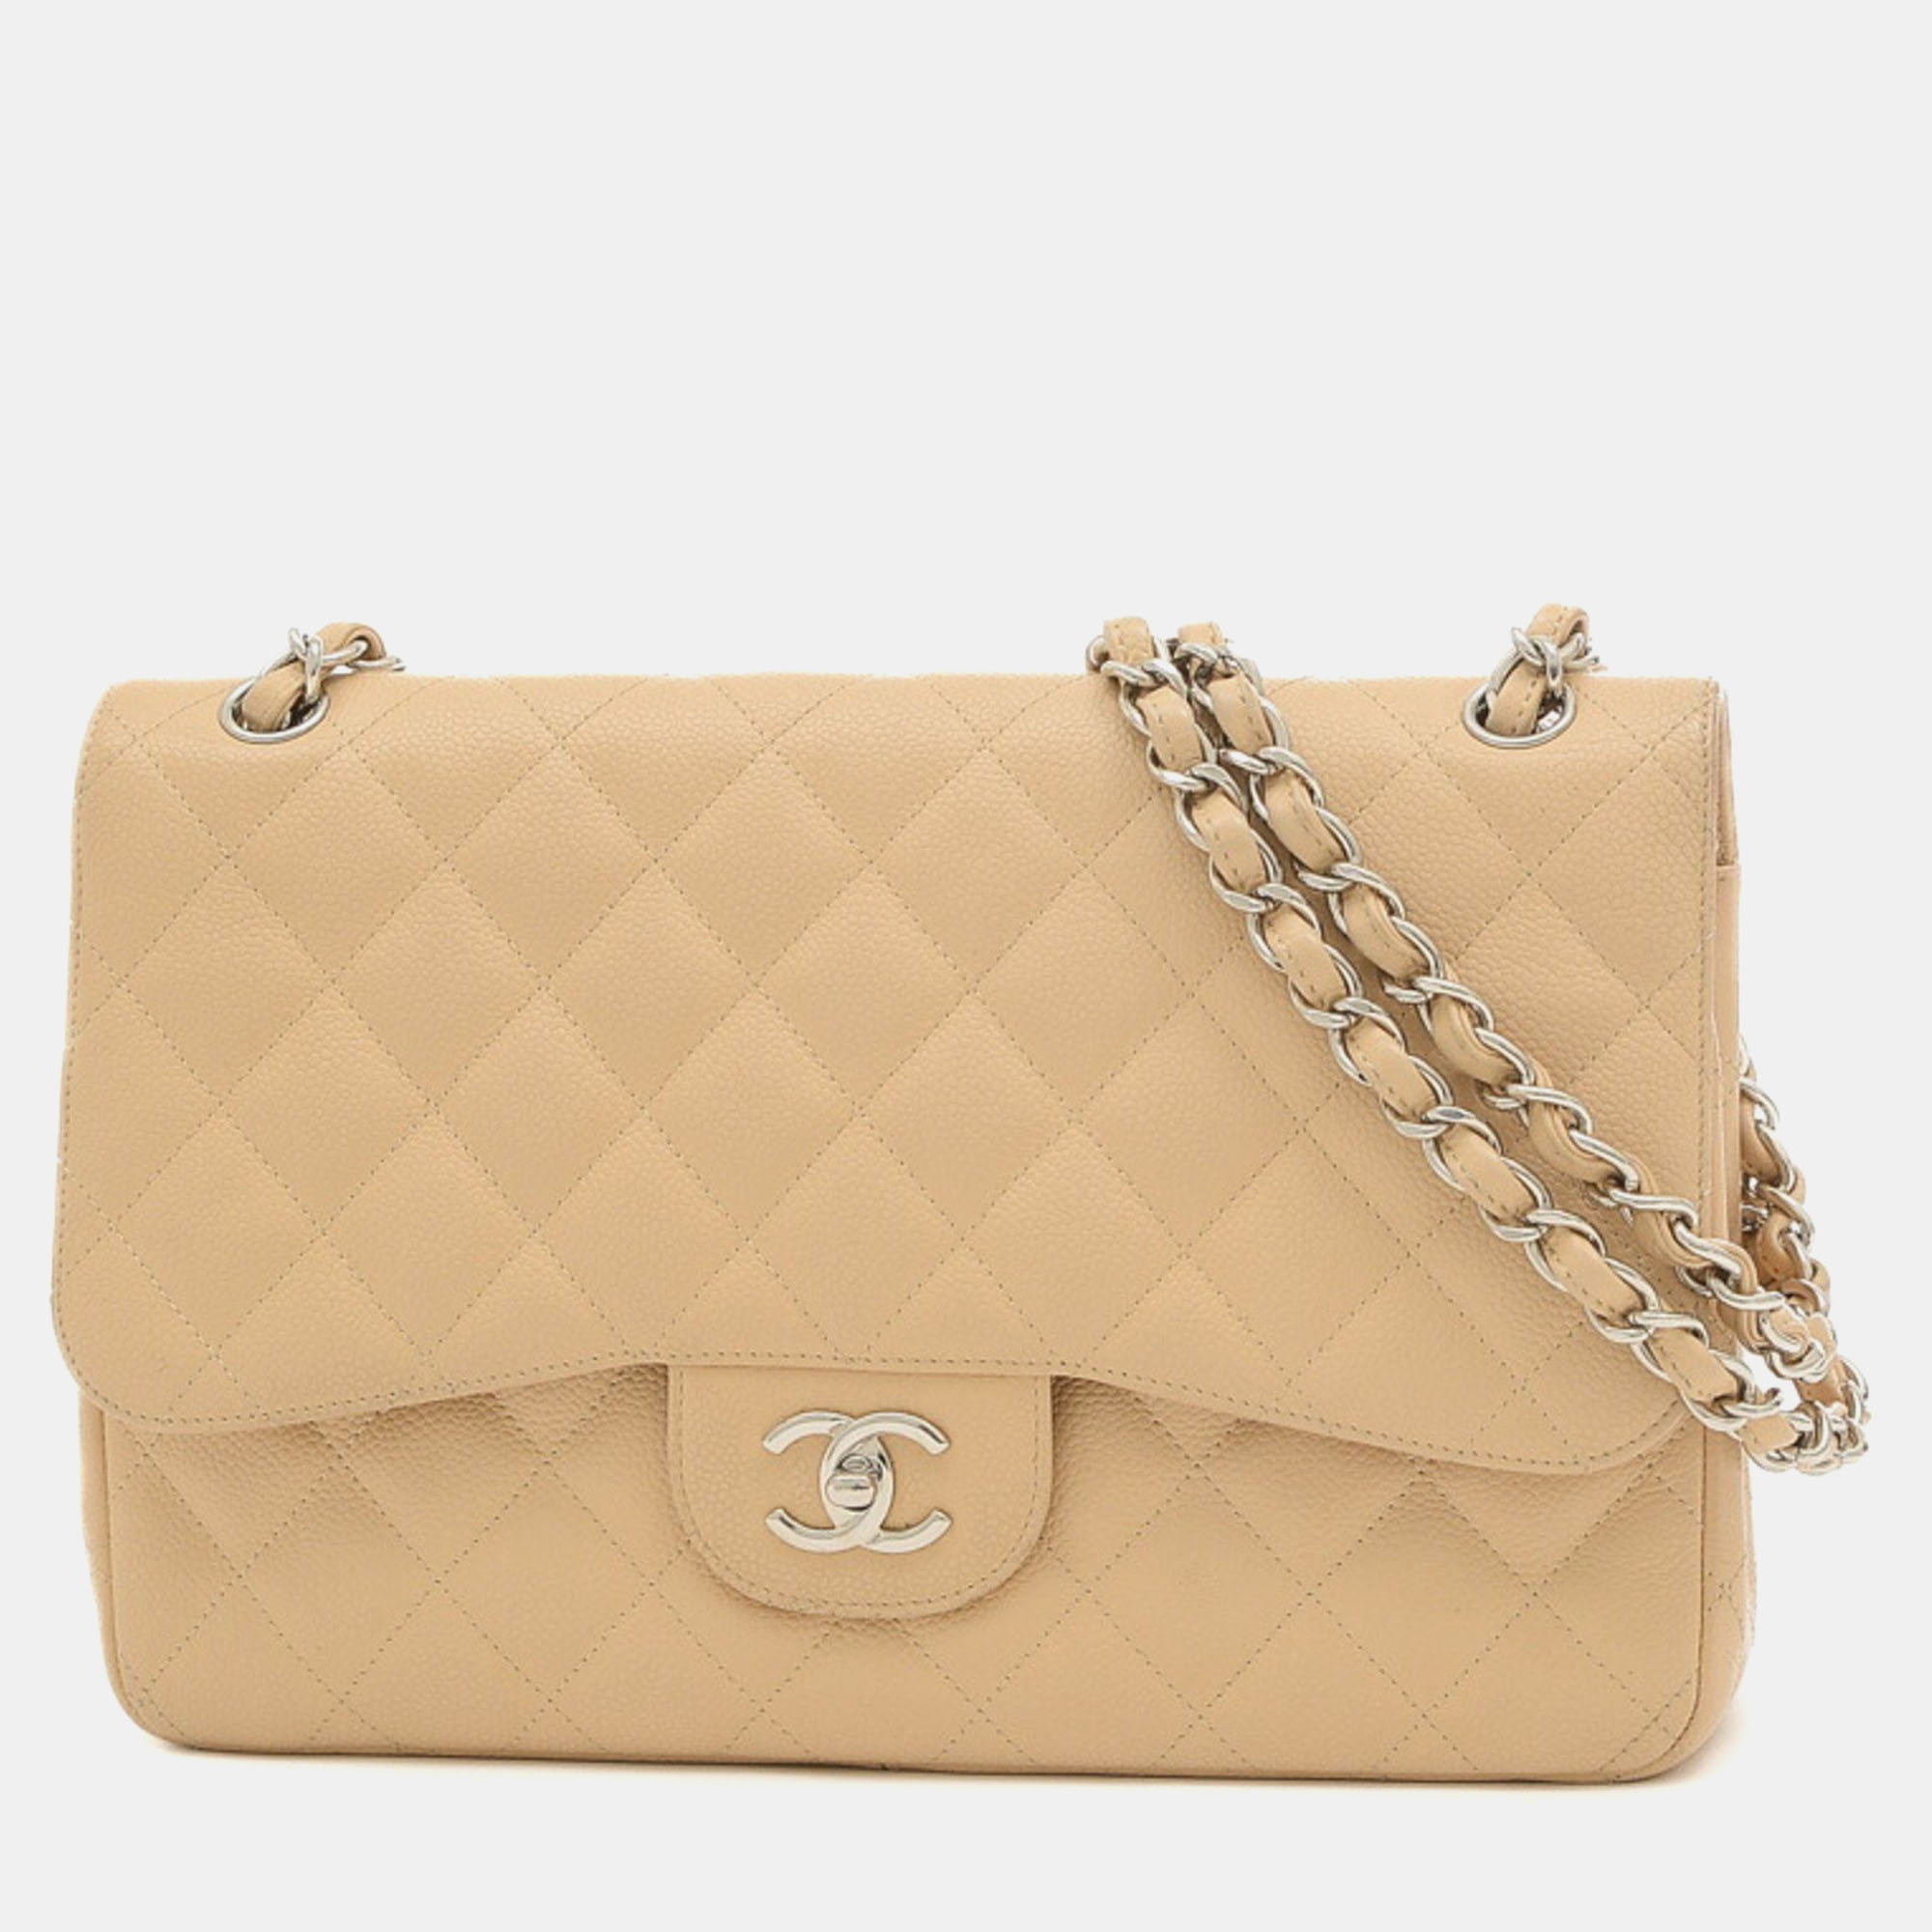 Pre-owned Chanel Beige Caviar Leather Jumbo Classic Double Flap Bag